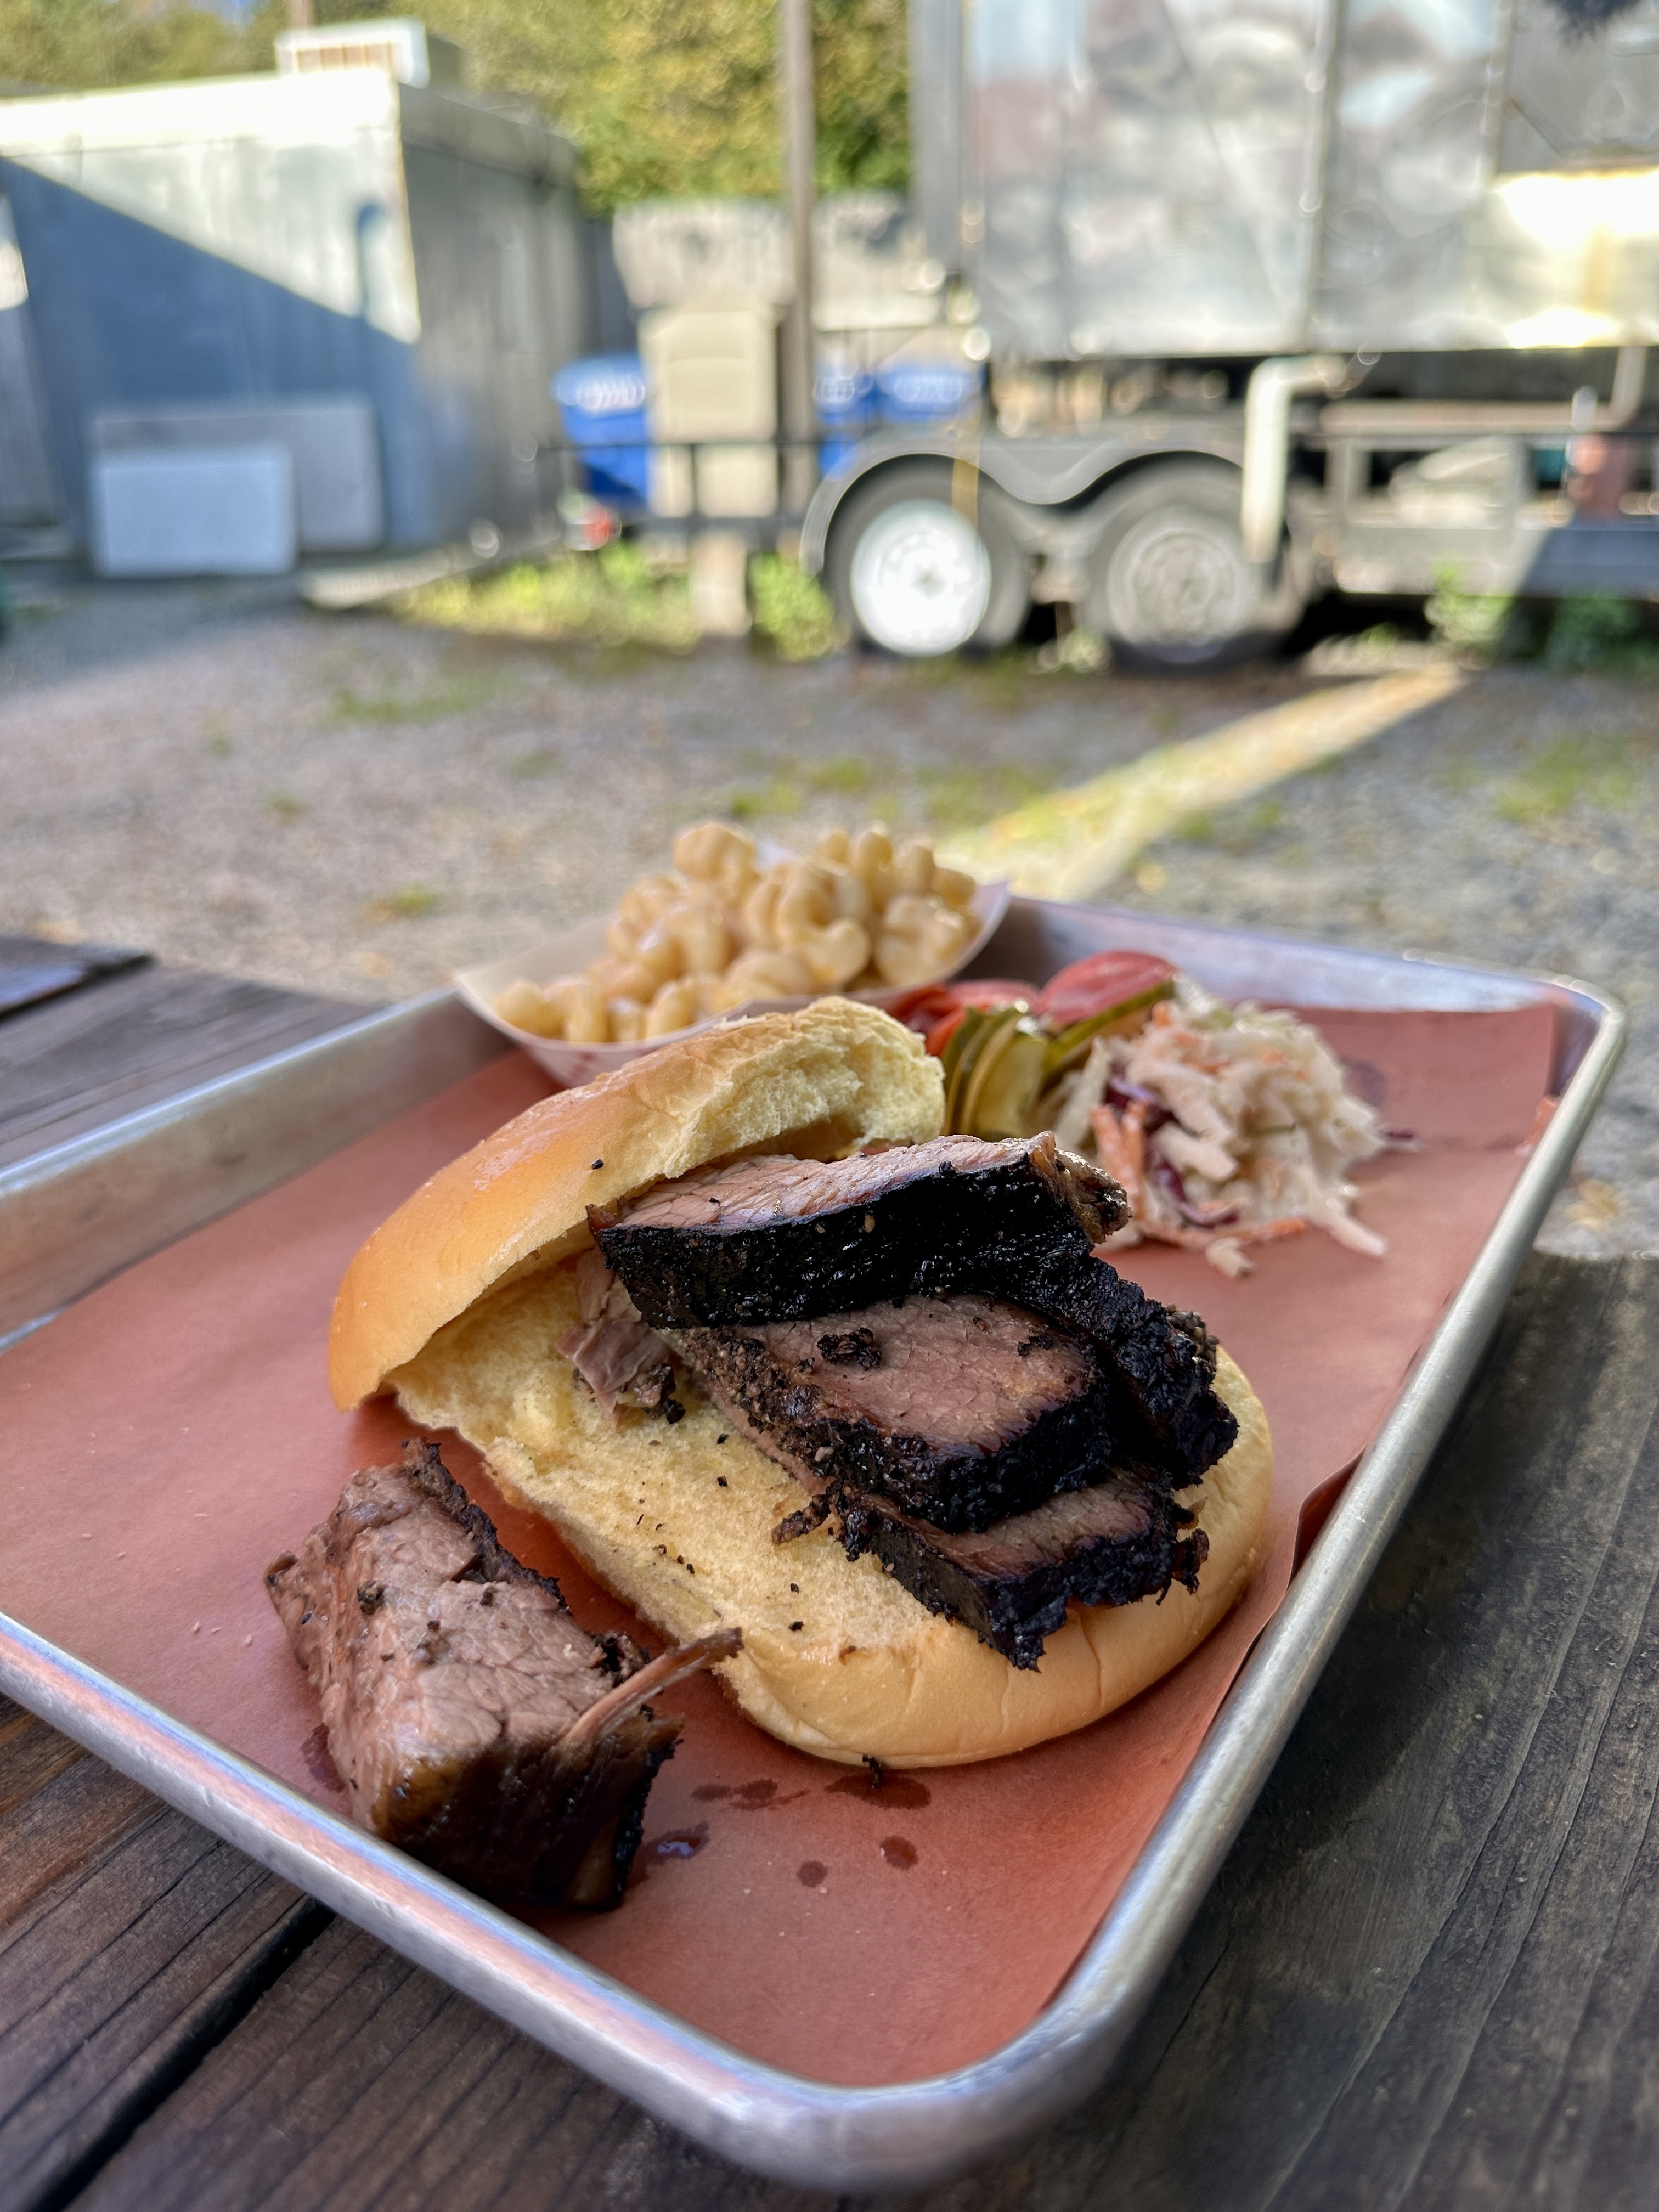 plate of food at BBQ restaurant with smoker in trailer behind it